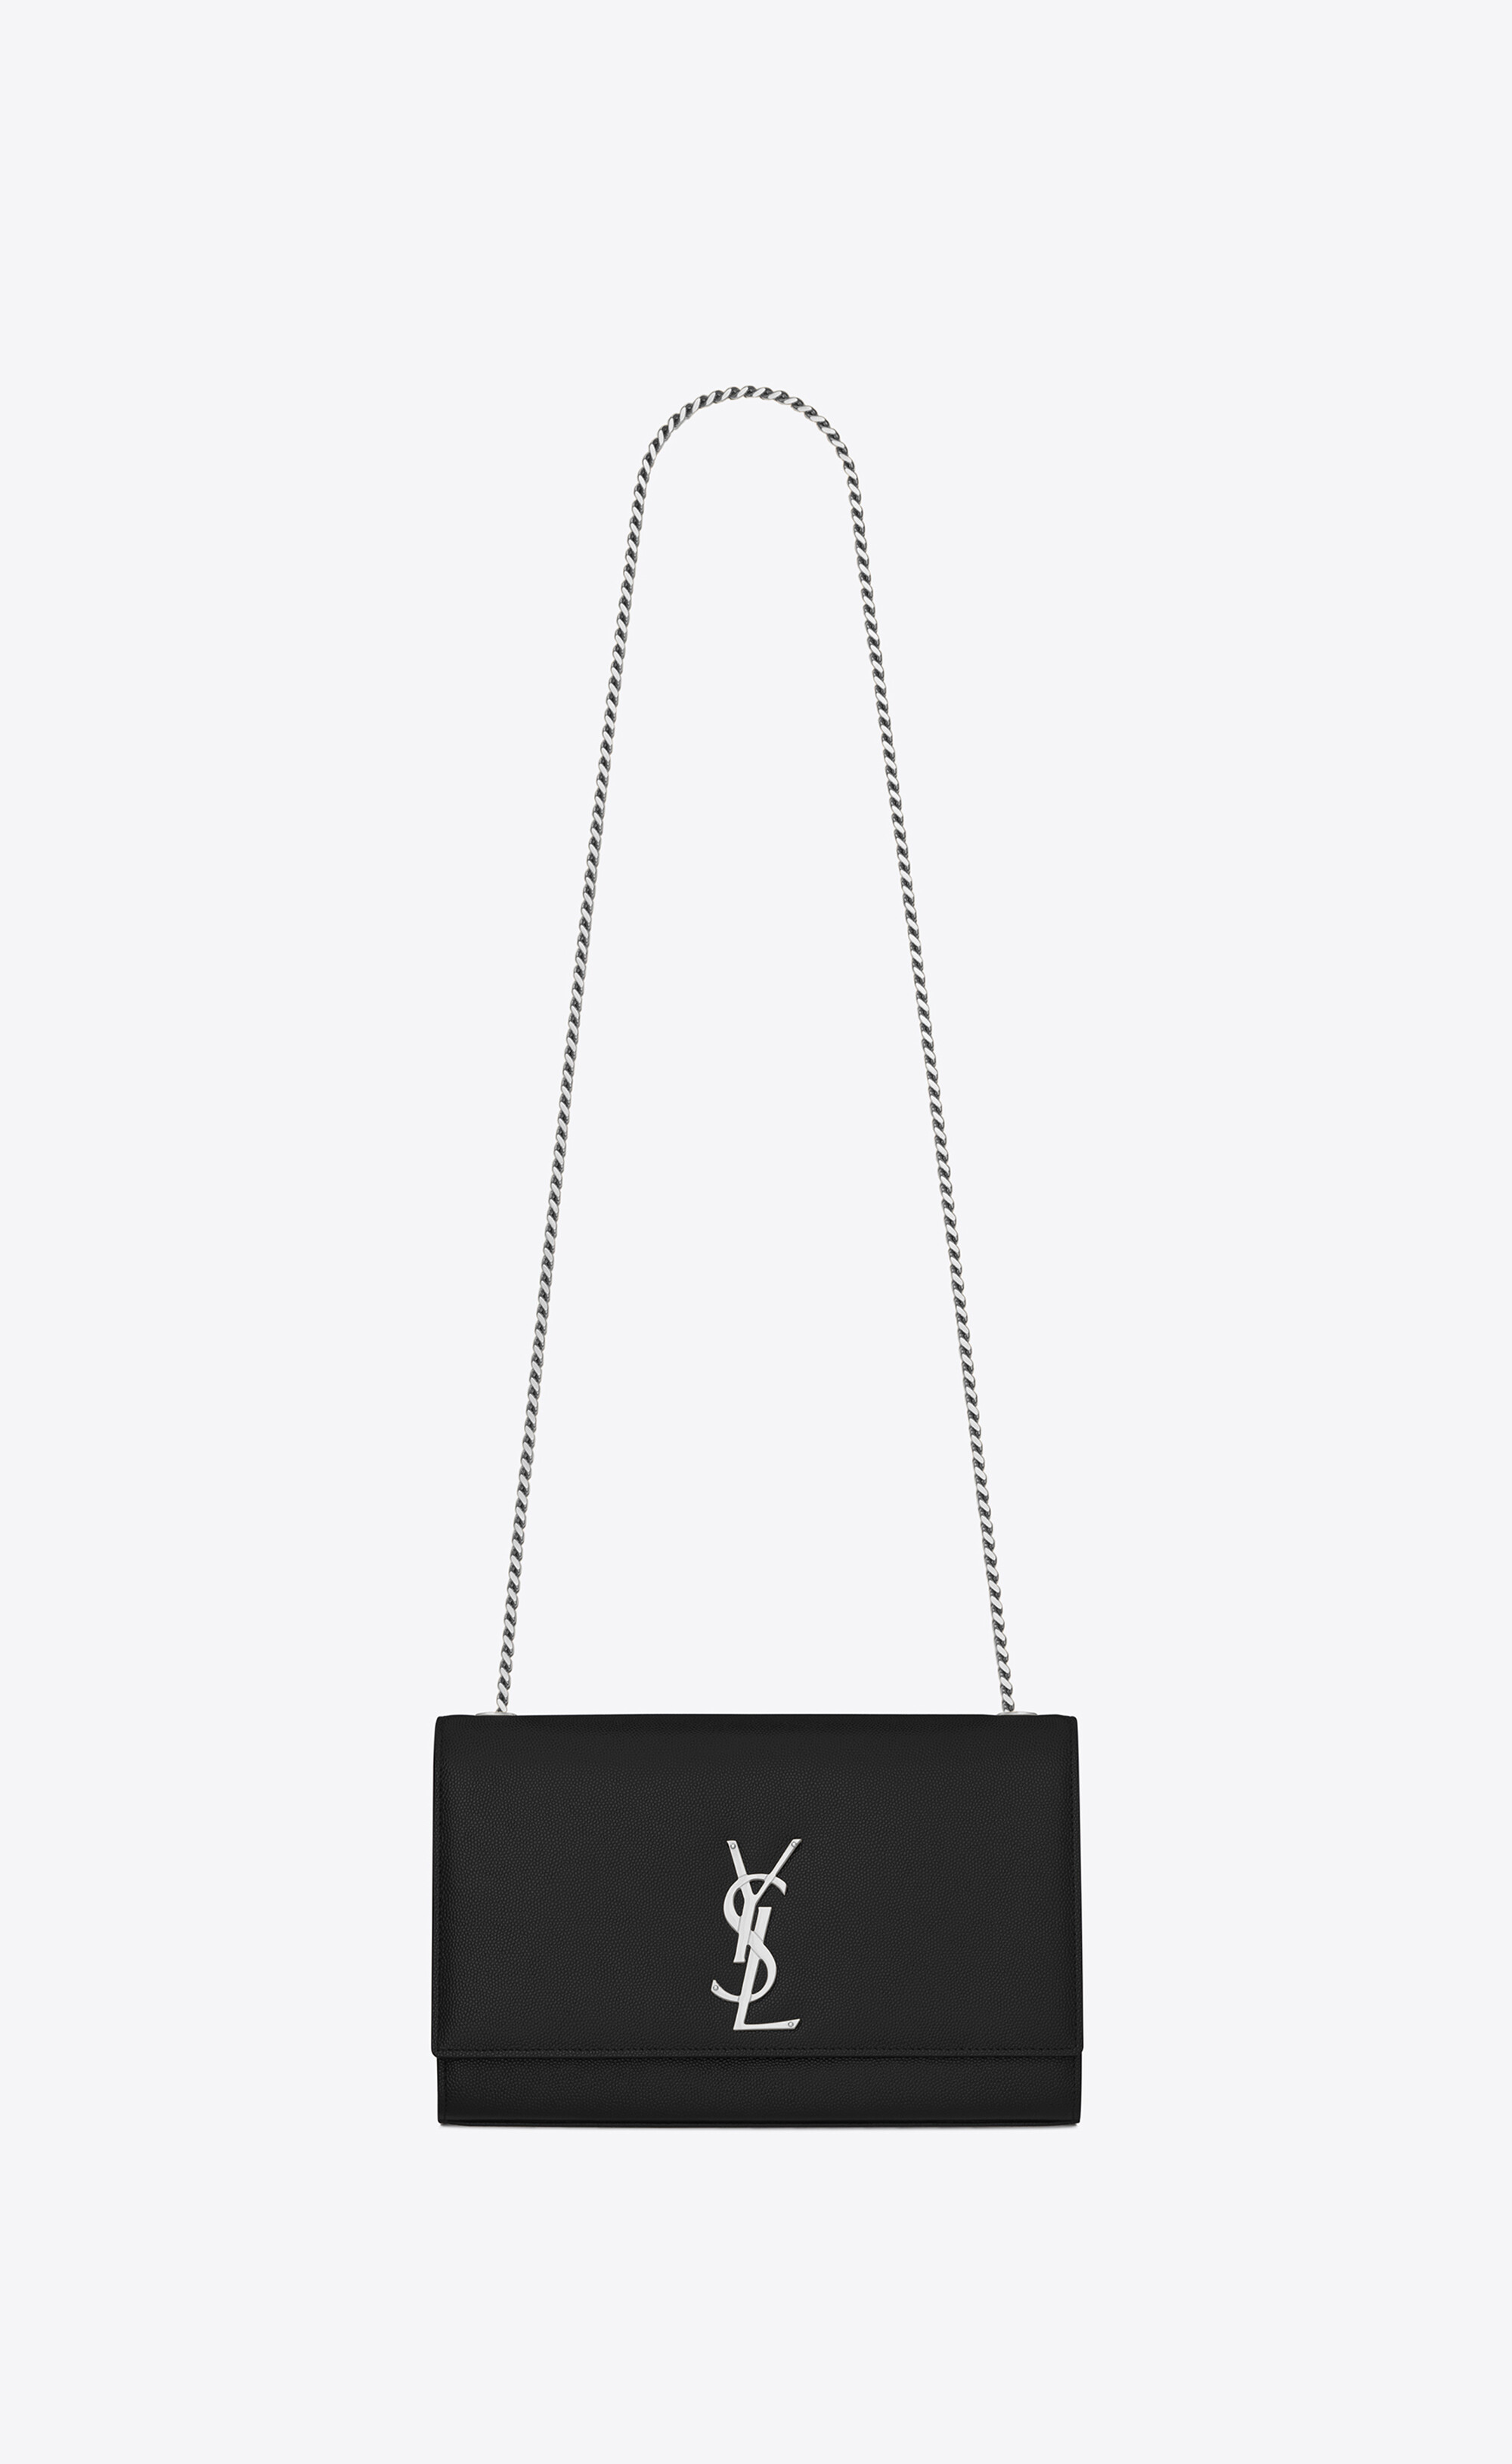 This Season's Saint Laurent Kate Bag Is Undeniably Chic In Black And White